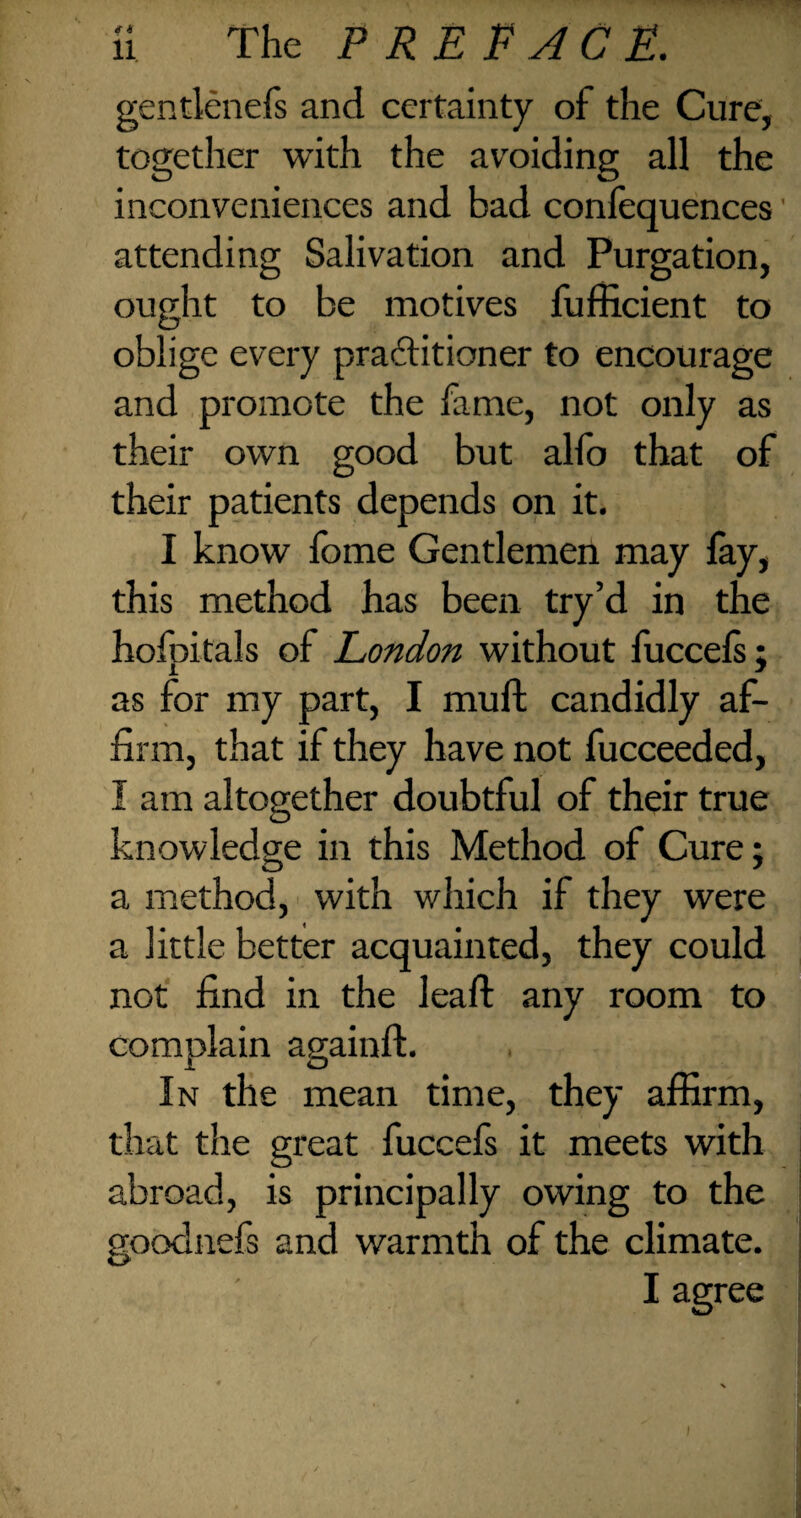 gentienefs and certainty of the Cure, together with the avoiding all the inconveniences and bad confequences' attending Salivation and Purgation, ought to be motives fufficient to oblige every practitioner to encourage and promote the fame, not only as their own good but alfo that of their patients depends on it. I know fome Gentlemen may fay, this method has been try’d in the hofpitals of London without fuccels; as for my part, I mult candidly af¬ firm, that if they have not fucceeded, I am altogether doubtful of their true knowledge in this Method of Cure; a method, with which if they were a little better acquainted, they could not find in the leaft any room to complain againft. In the mean time, they affirm, that the great fuccefs it meets with abroad, is principally owing to the goodnefs and warmth of the climate. I agree